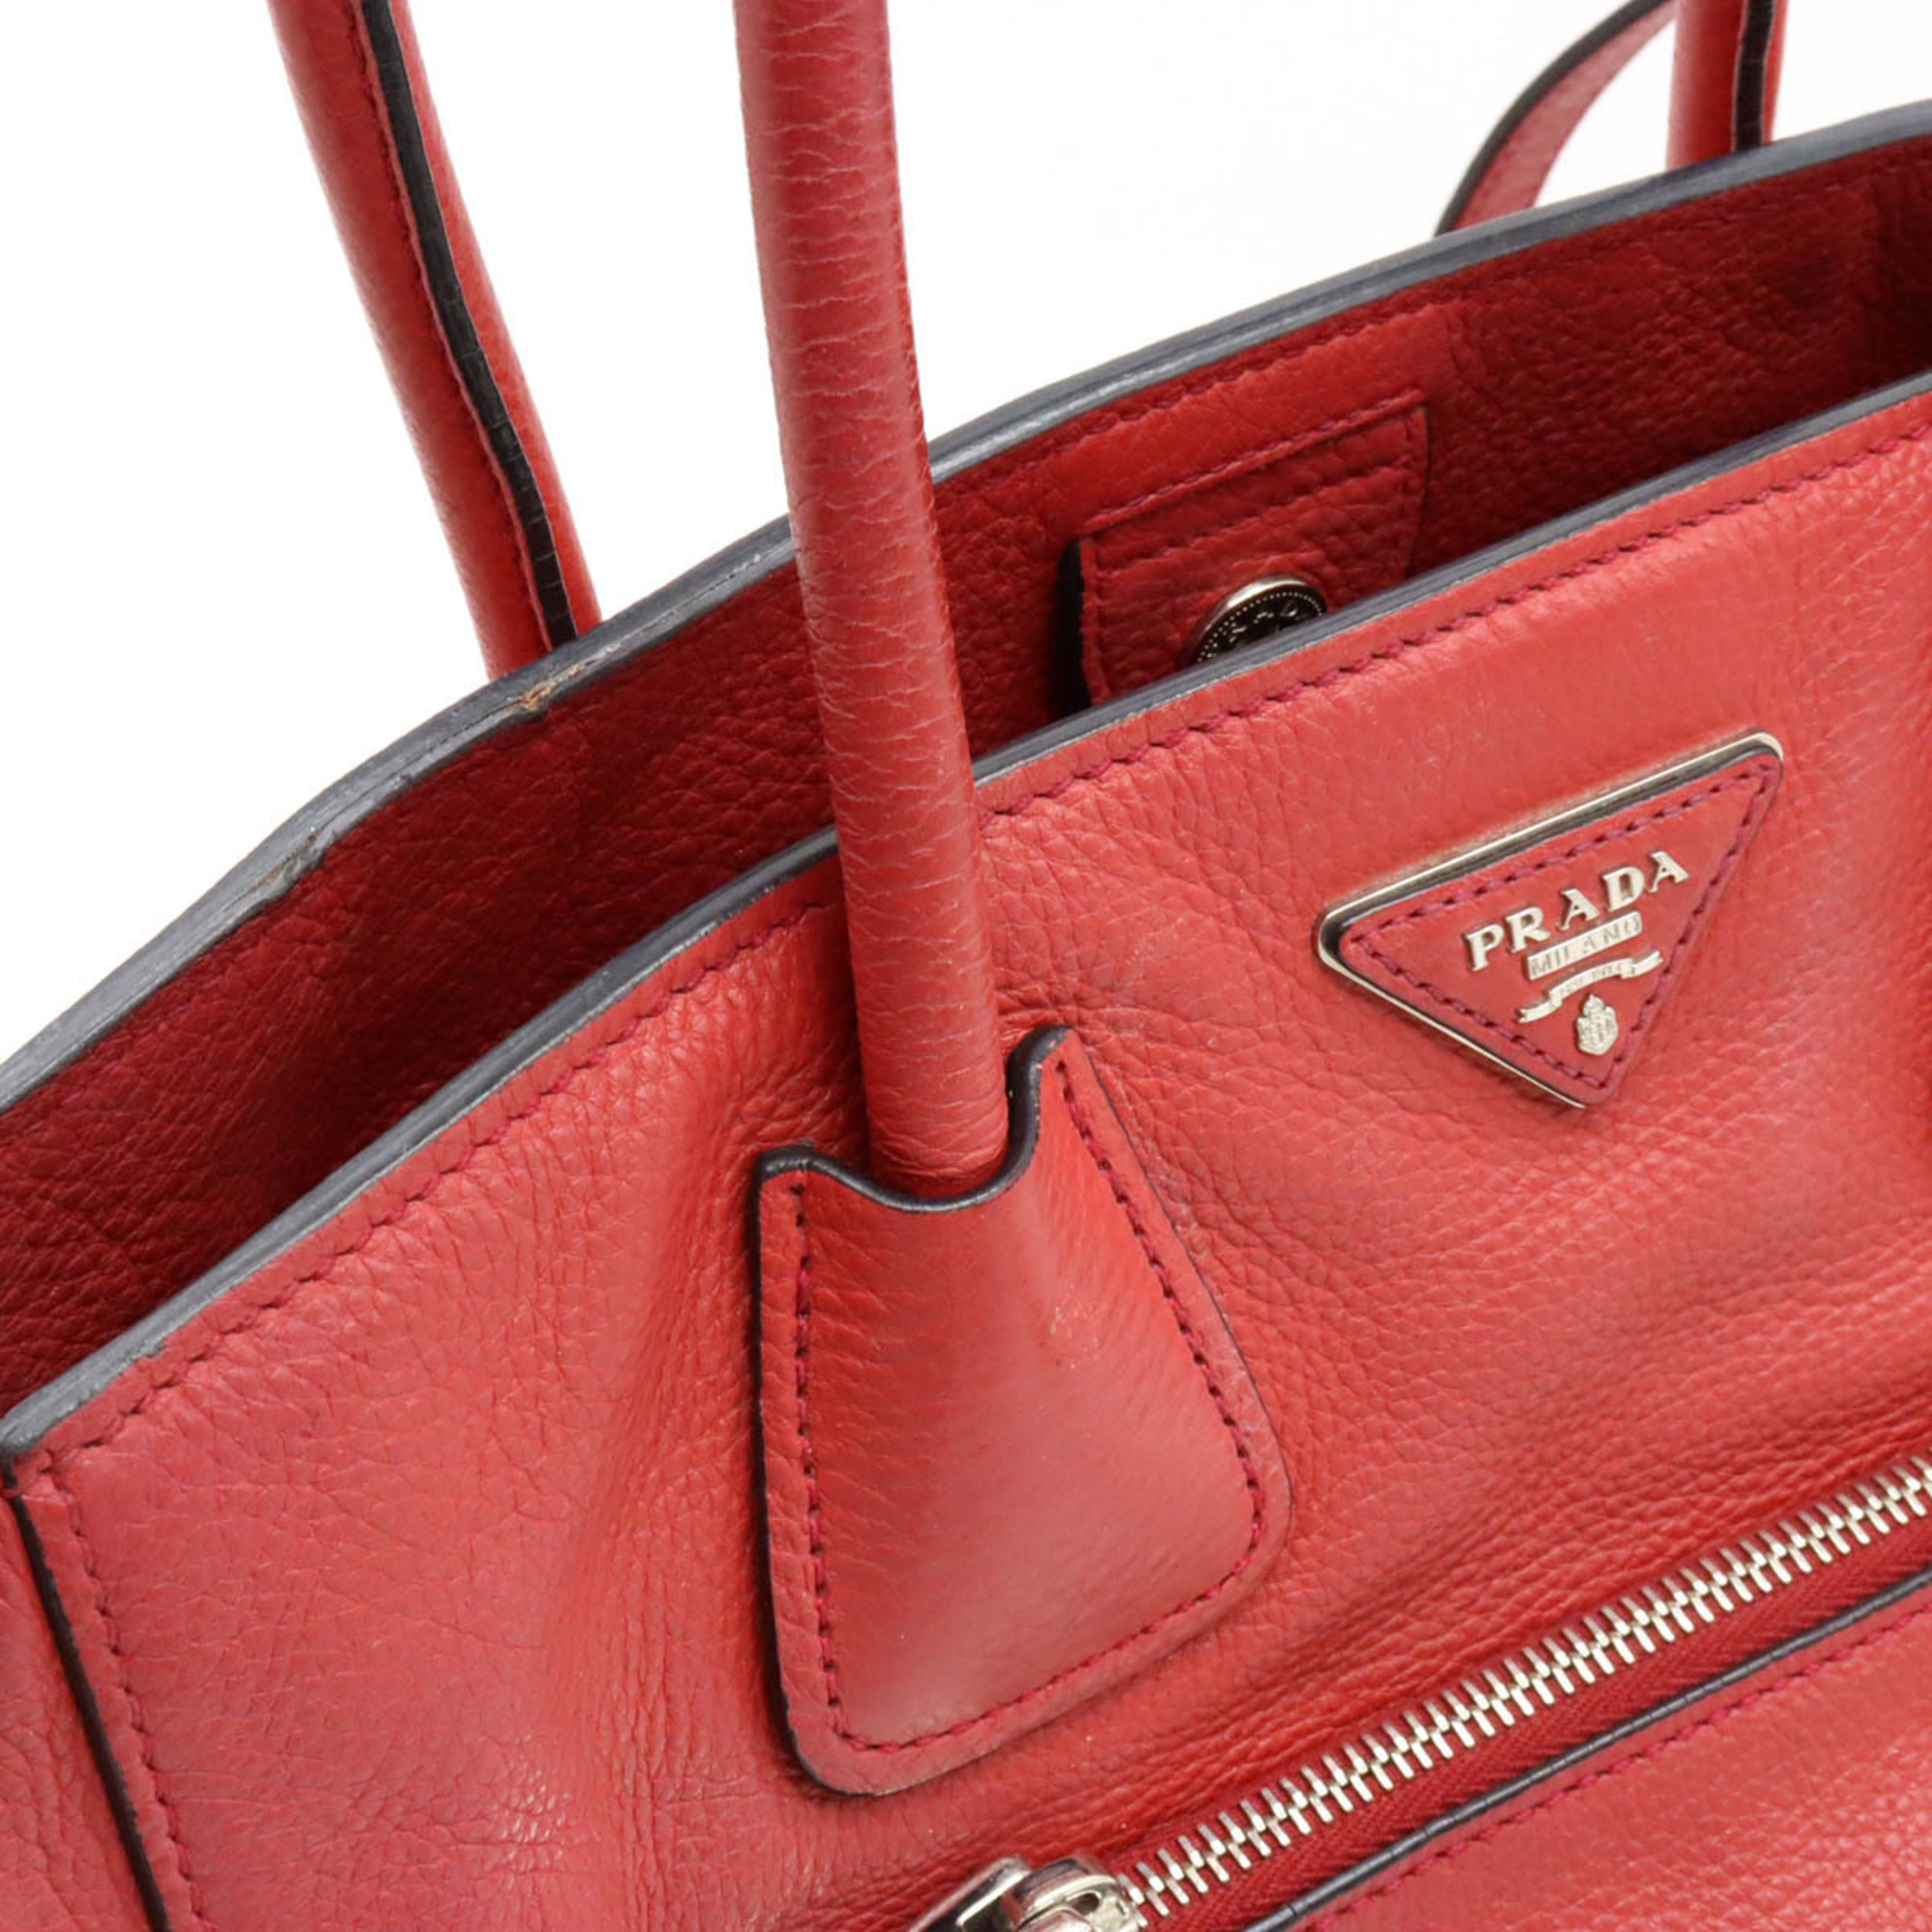 PRADA VITELLO PHENIX Tote Bag Shoulder Leather ROSSO Red Purchased at Domestic Outlet BN2795